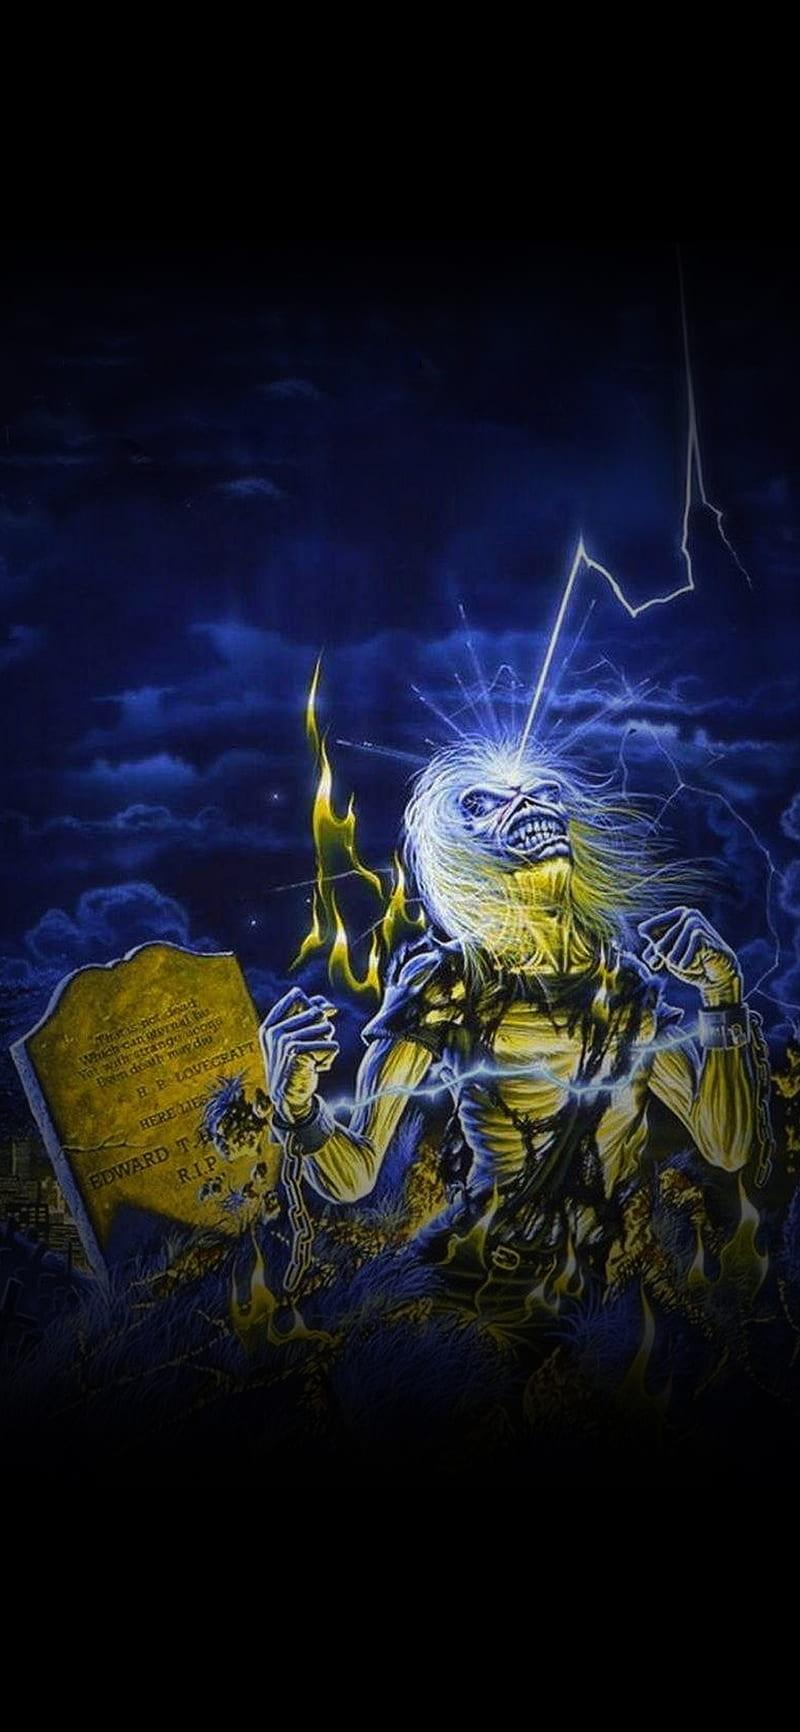 Iron Maiden Wallpaper for Mobile 800x1733